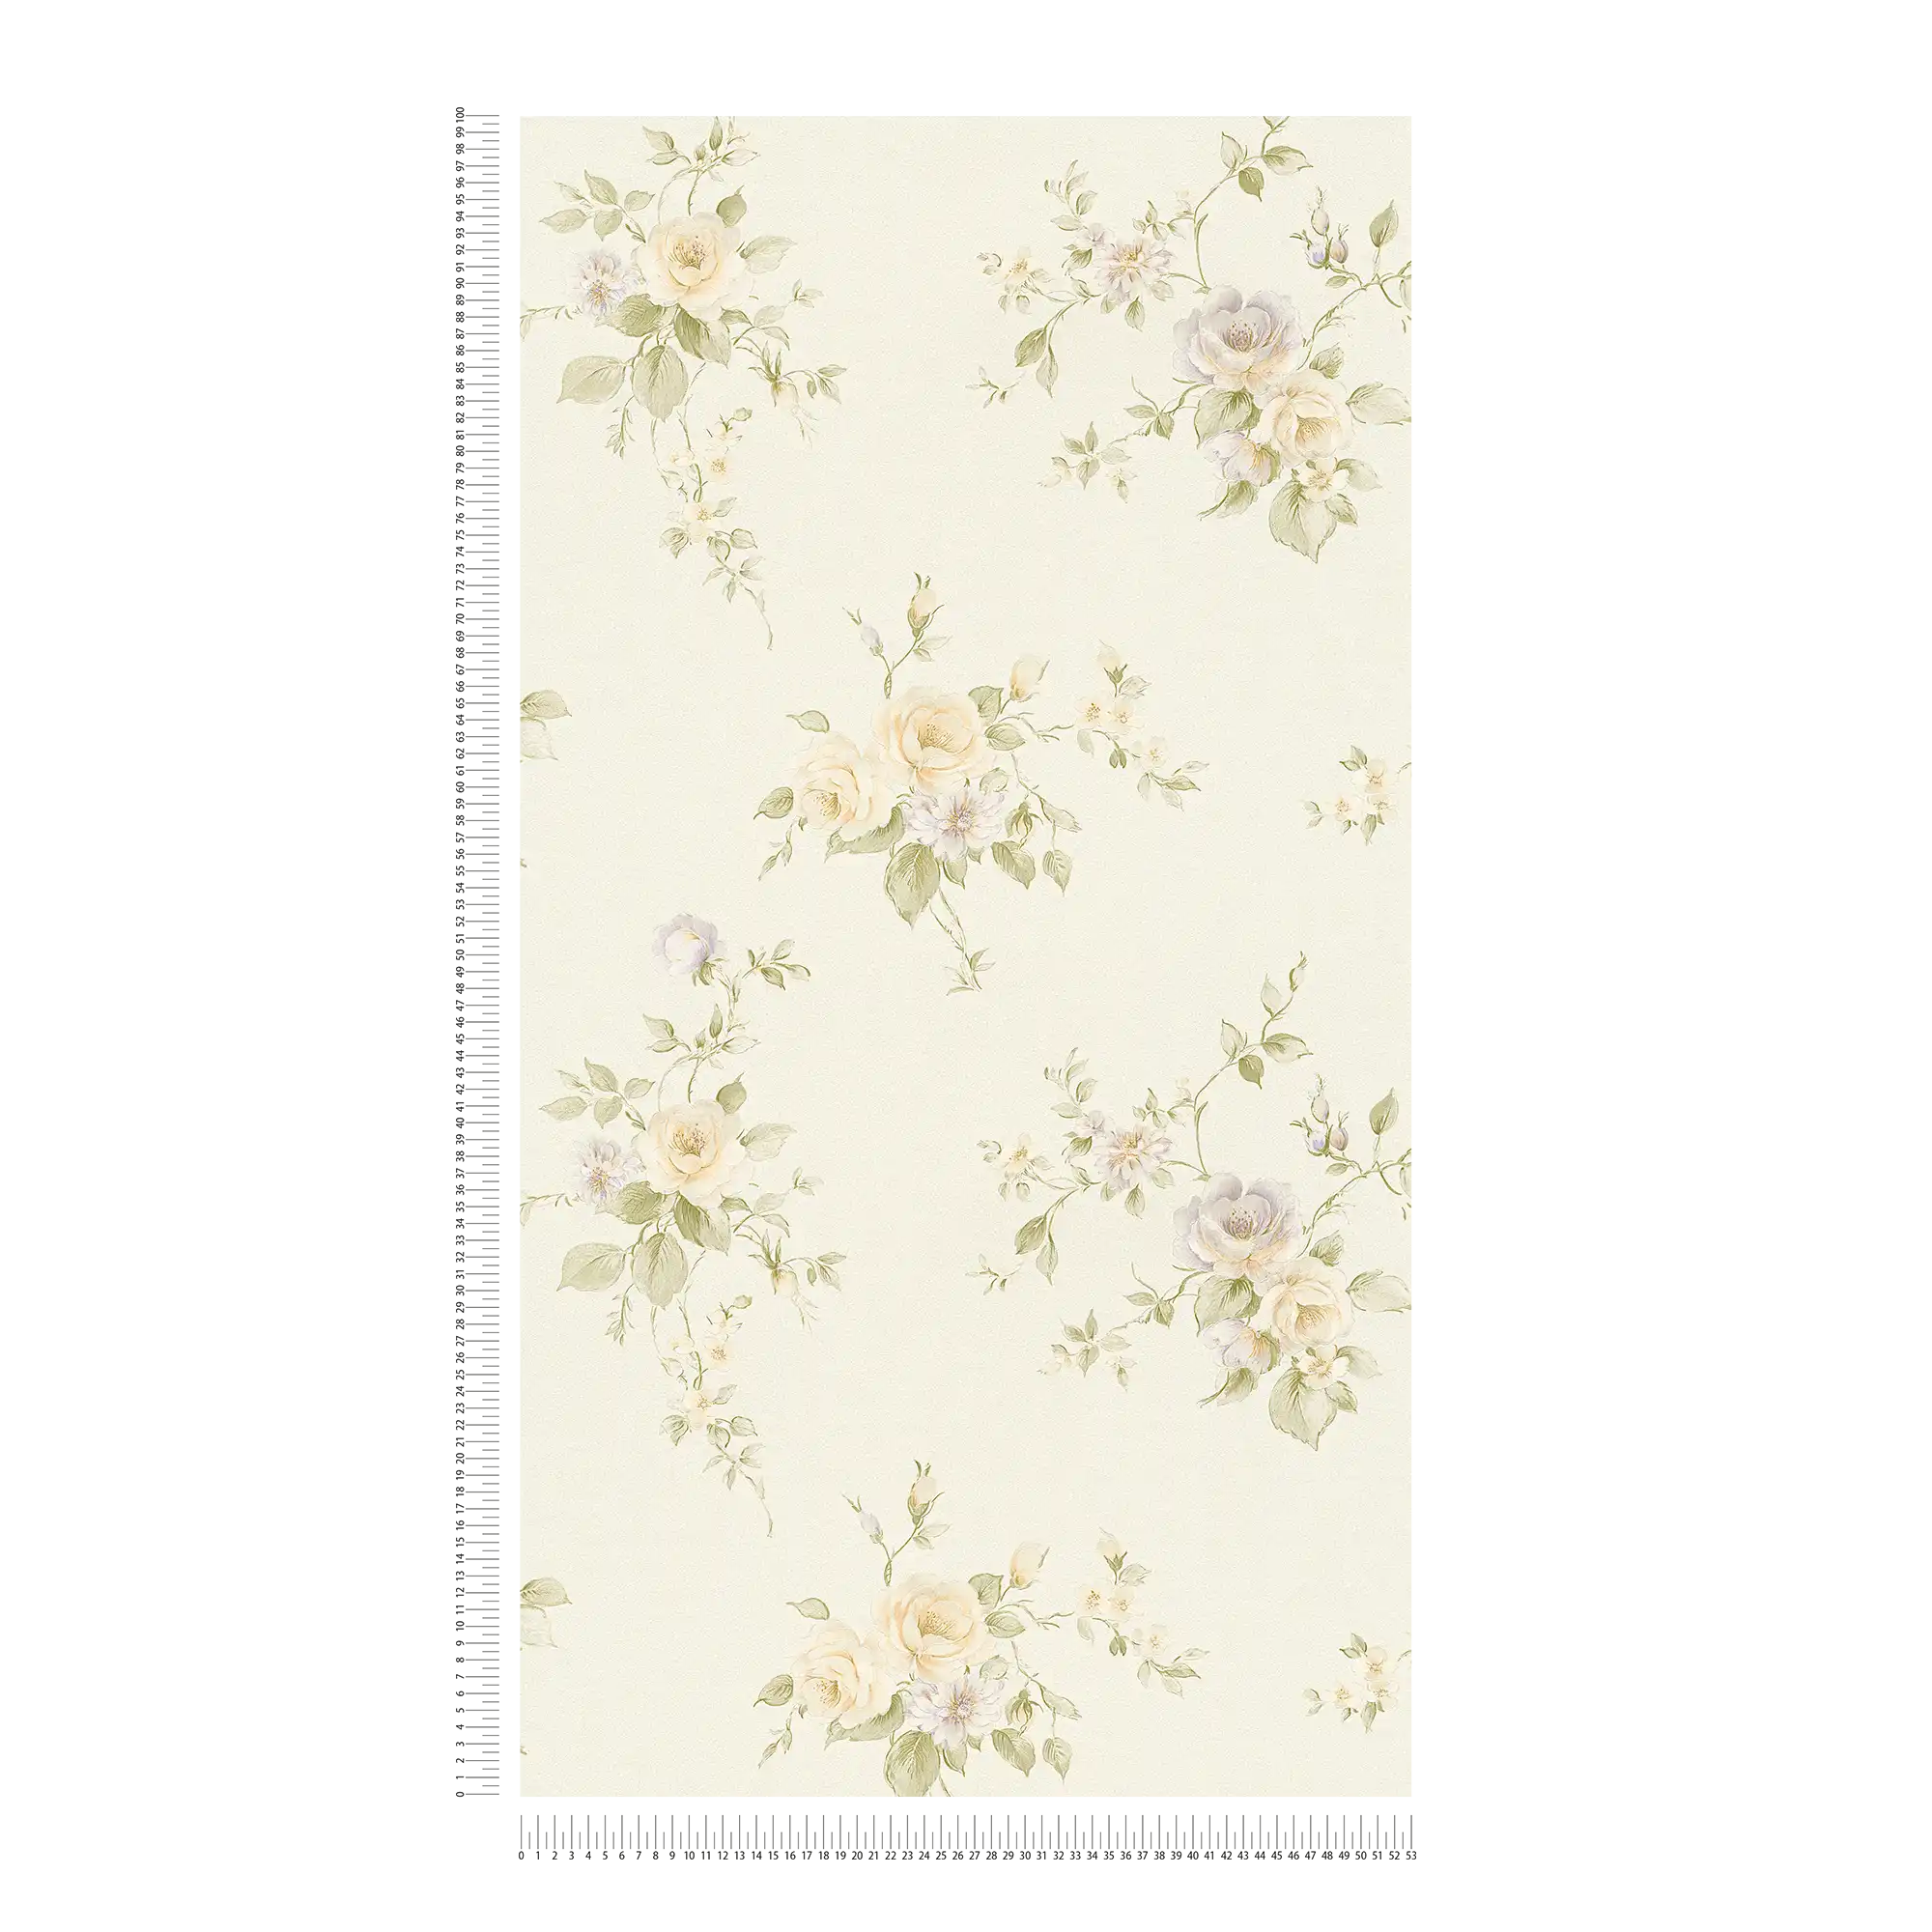             Roses wallpaper with floral ornaments - cream, green, orange
        